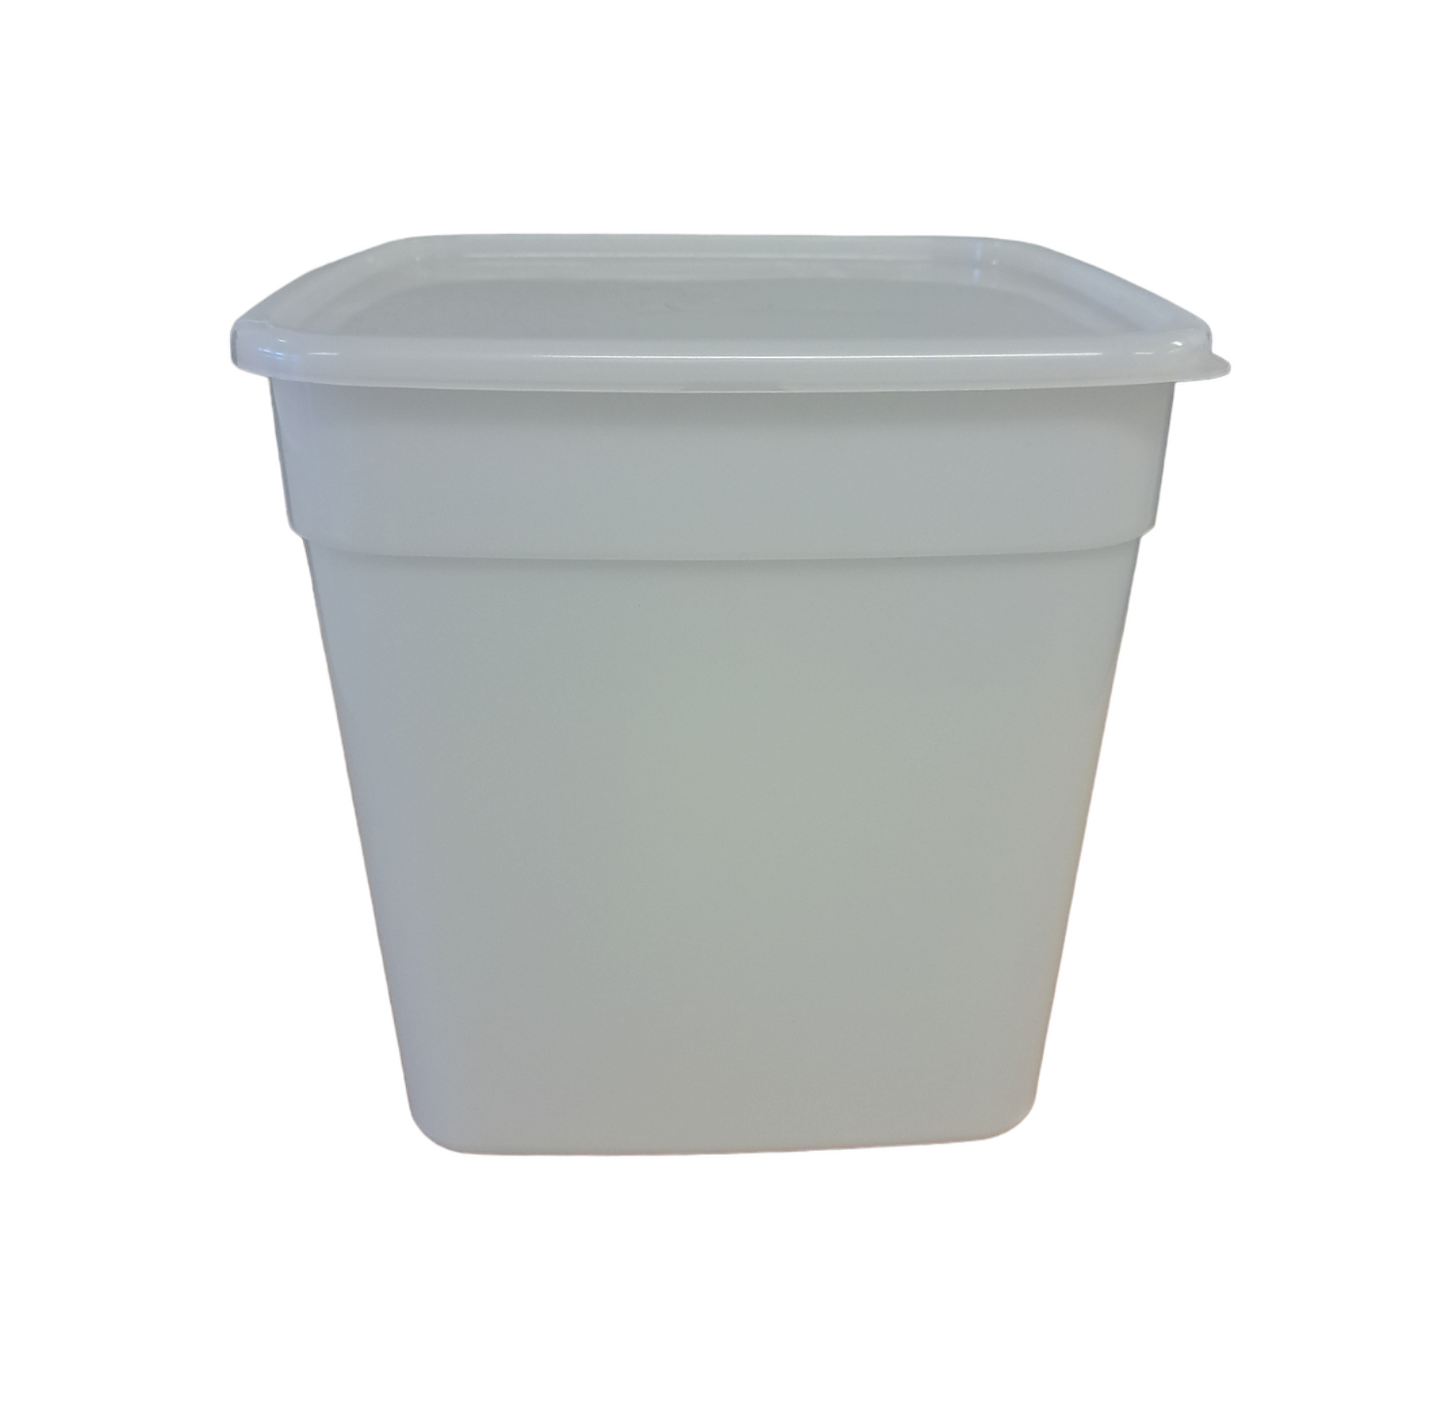 10 litre standard container with lid - Natural